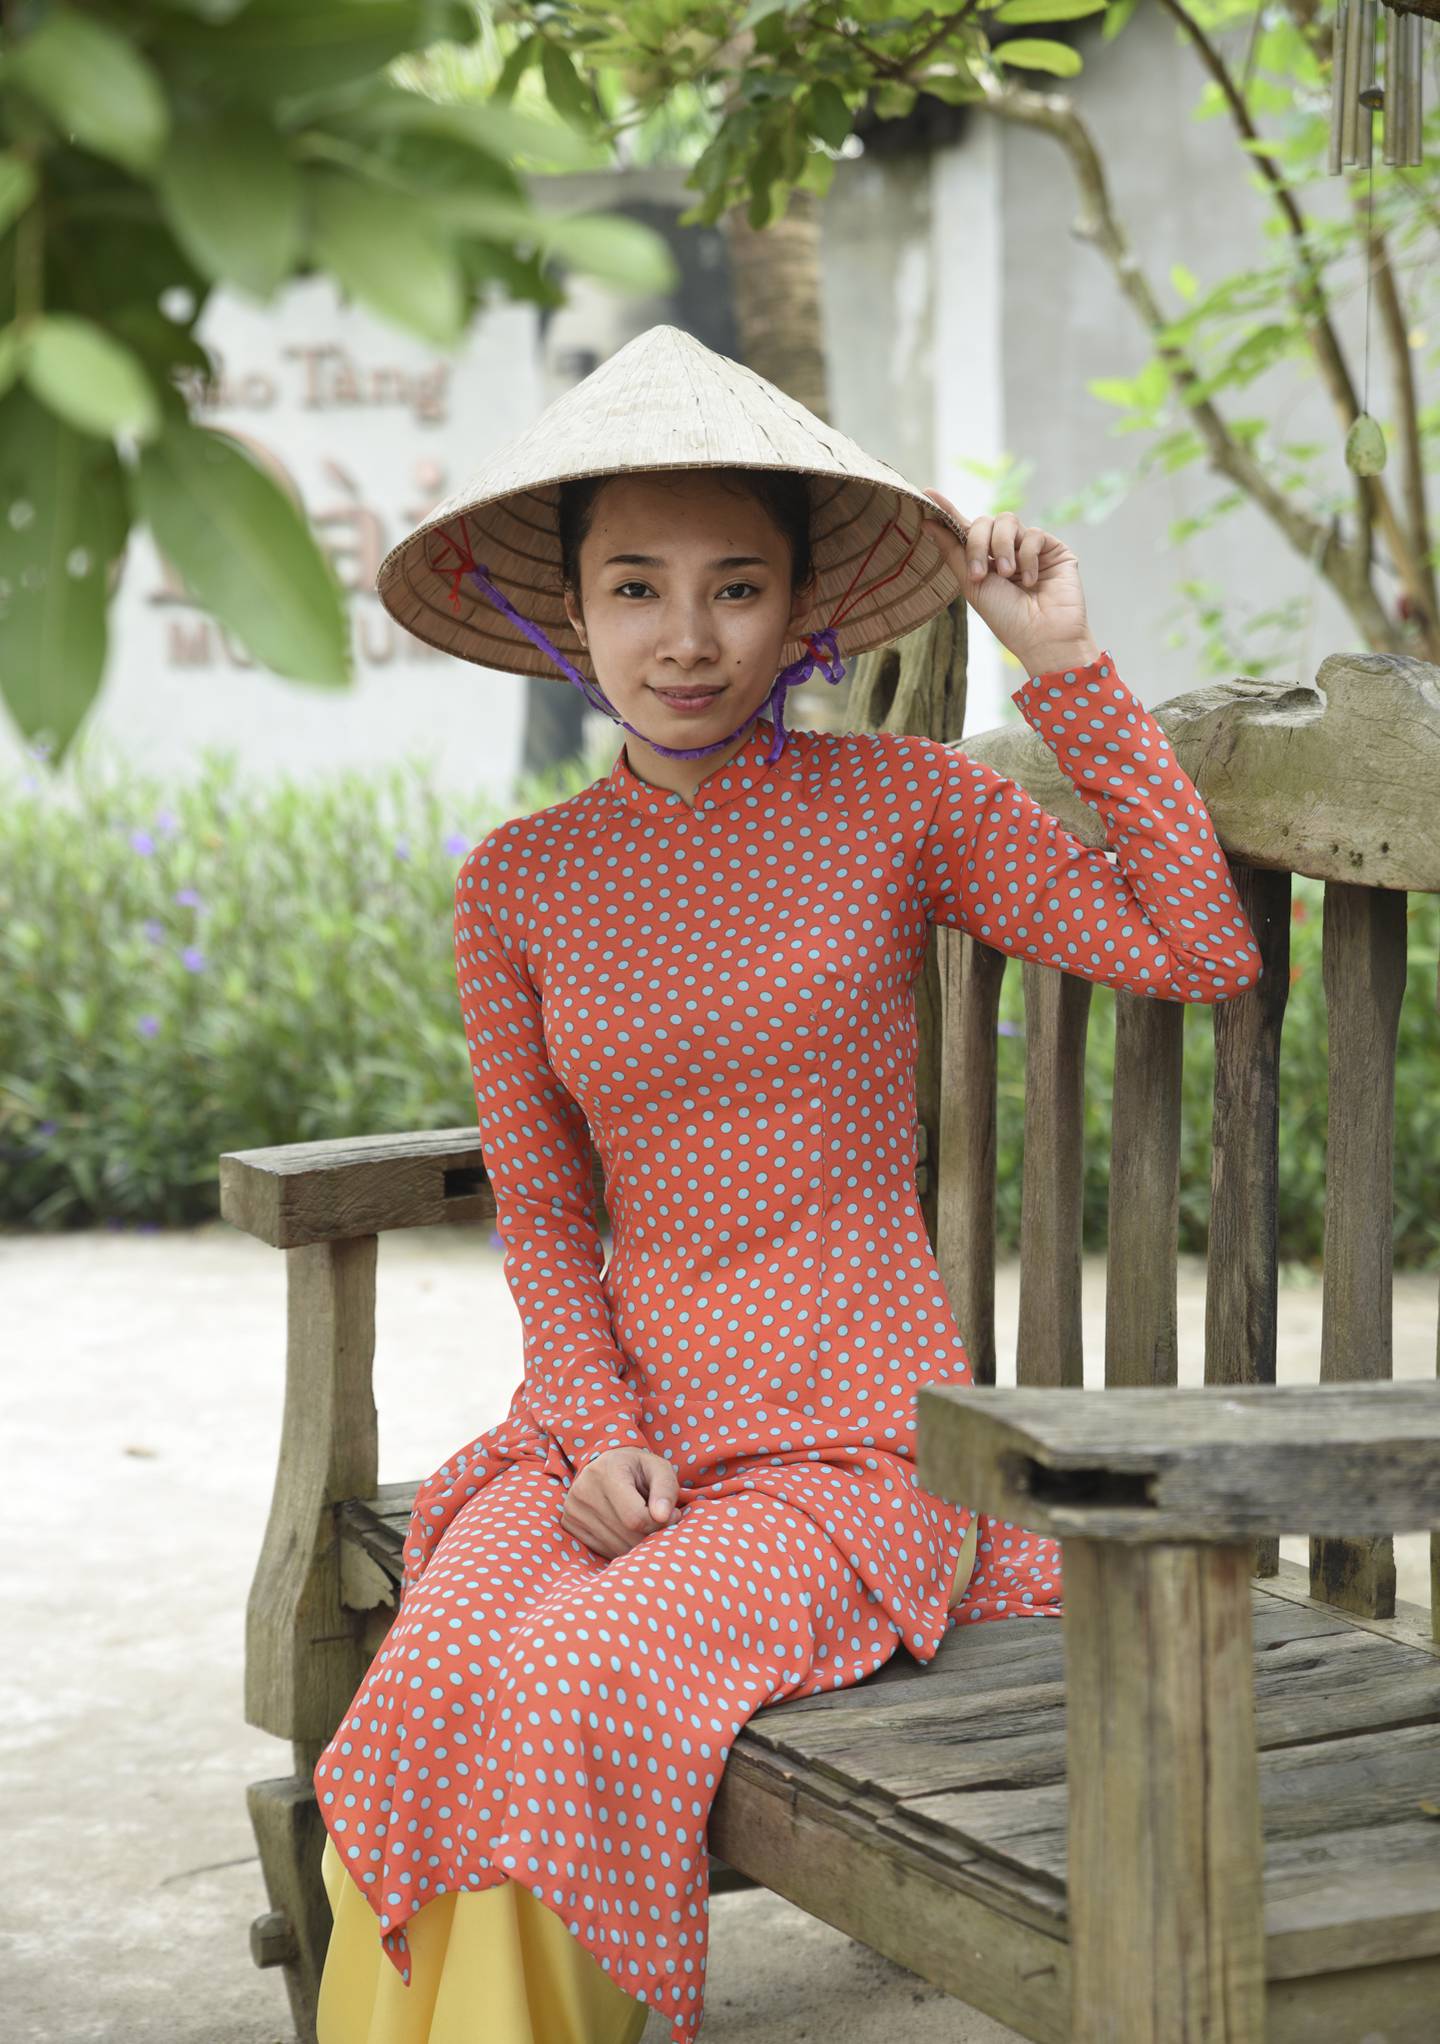 The ao dai consists of loose trousers worn beneath a long-sleeved, slender tunic with a high, Mandarin neckline. Courtesy Ronan O'Connell